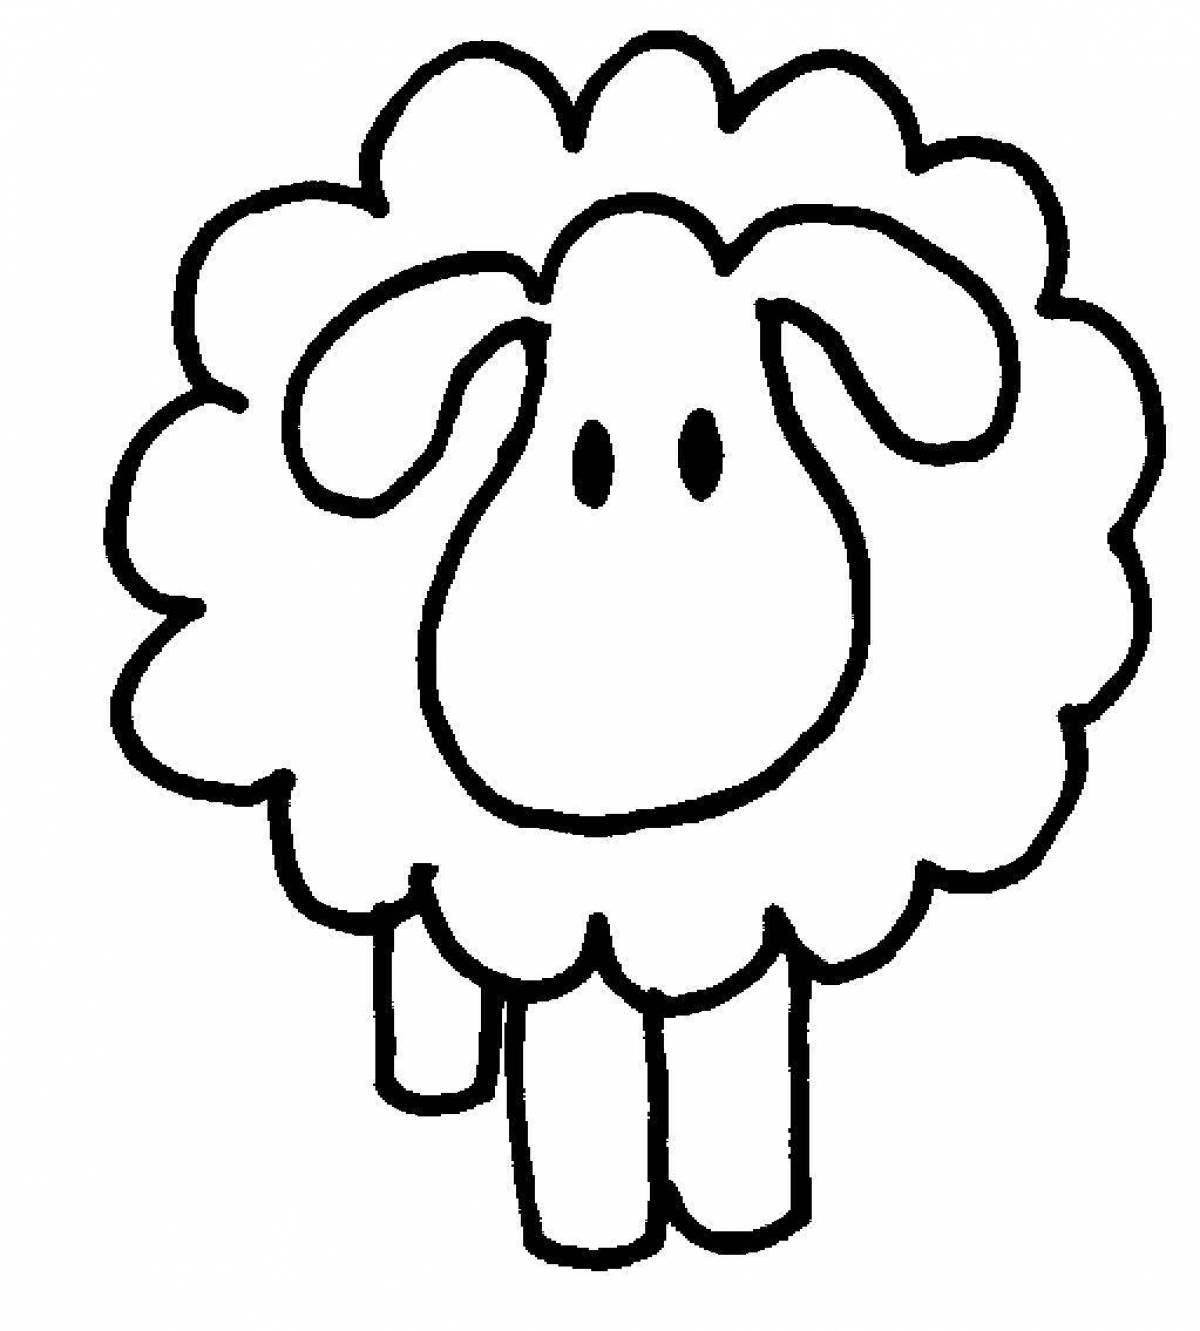 Sheep coloring book for children 2-3 years old